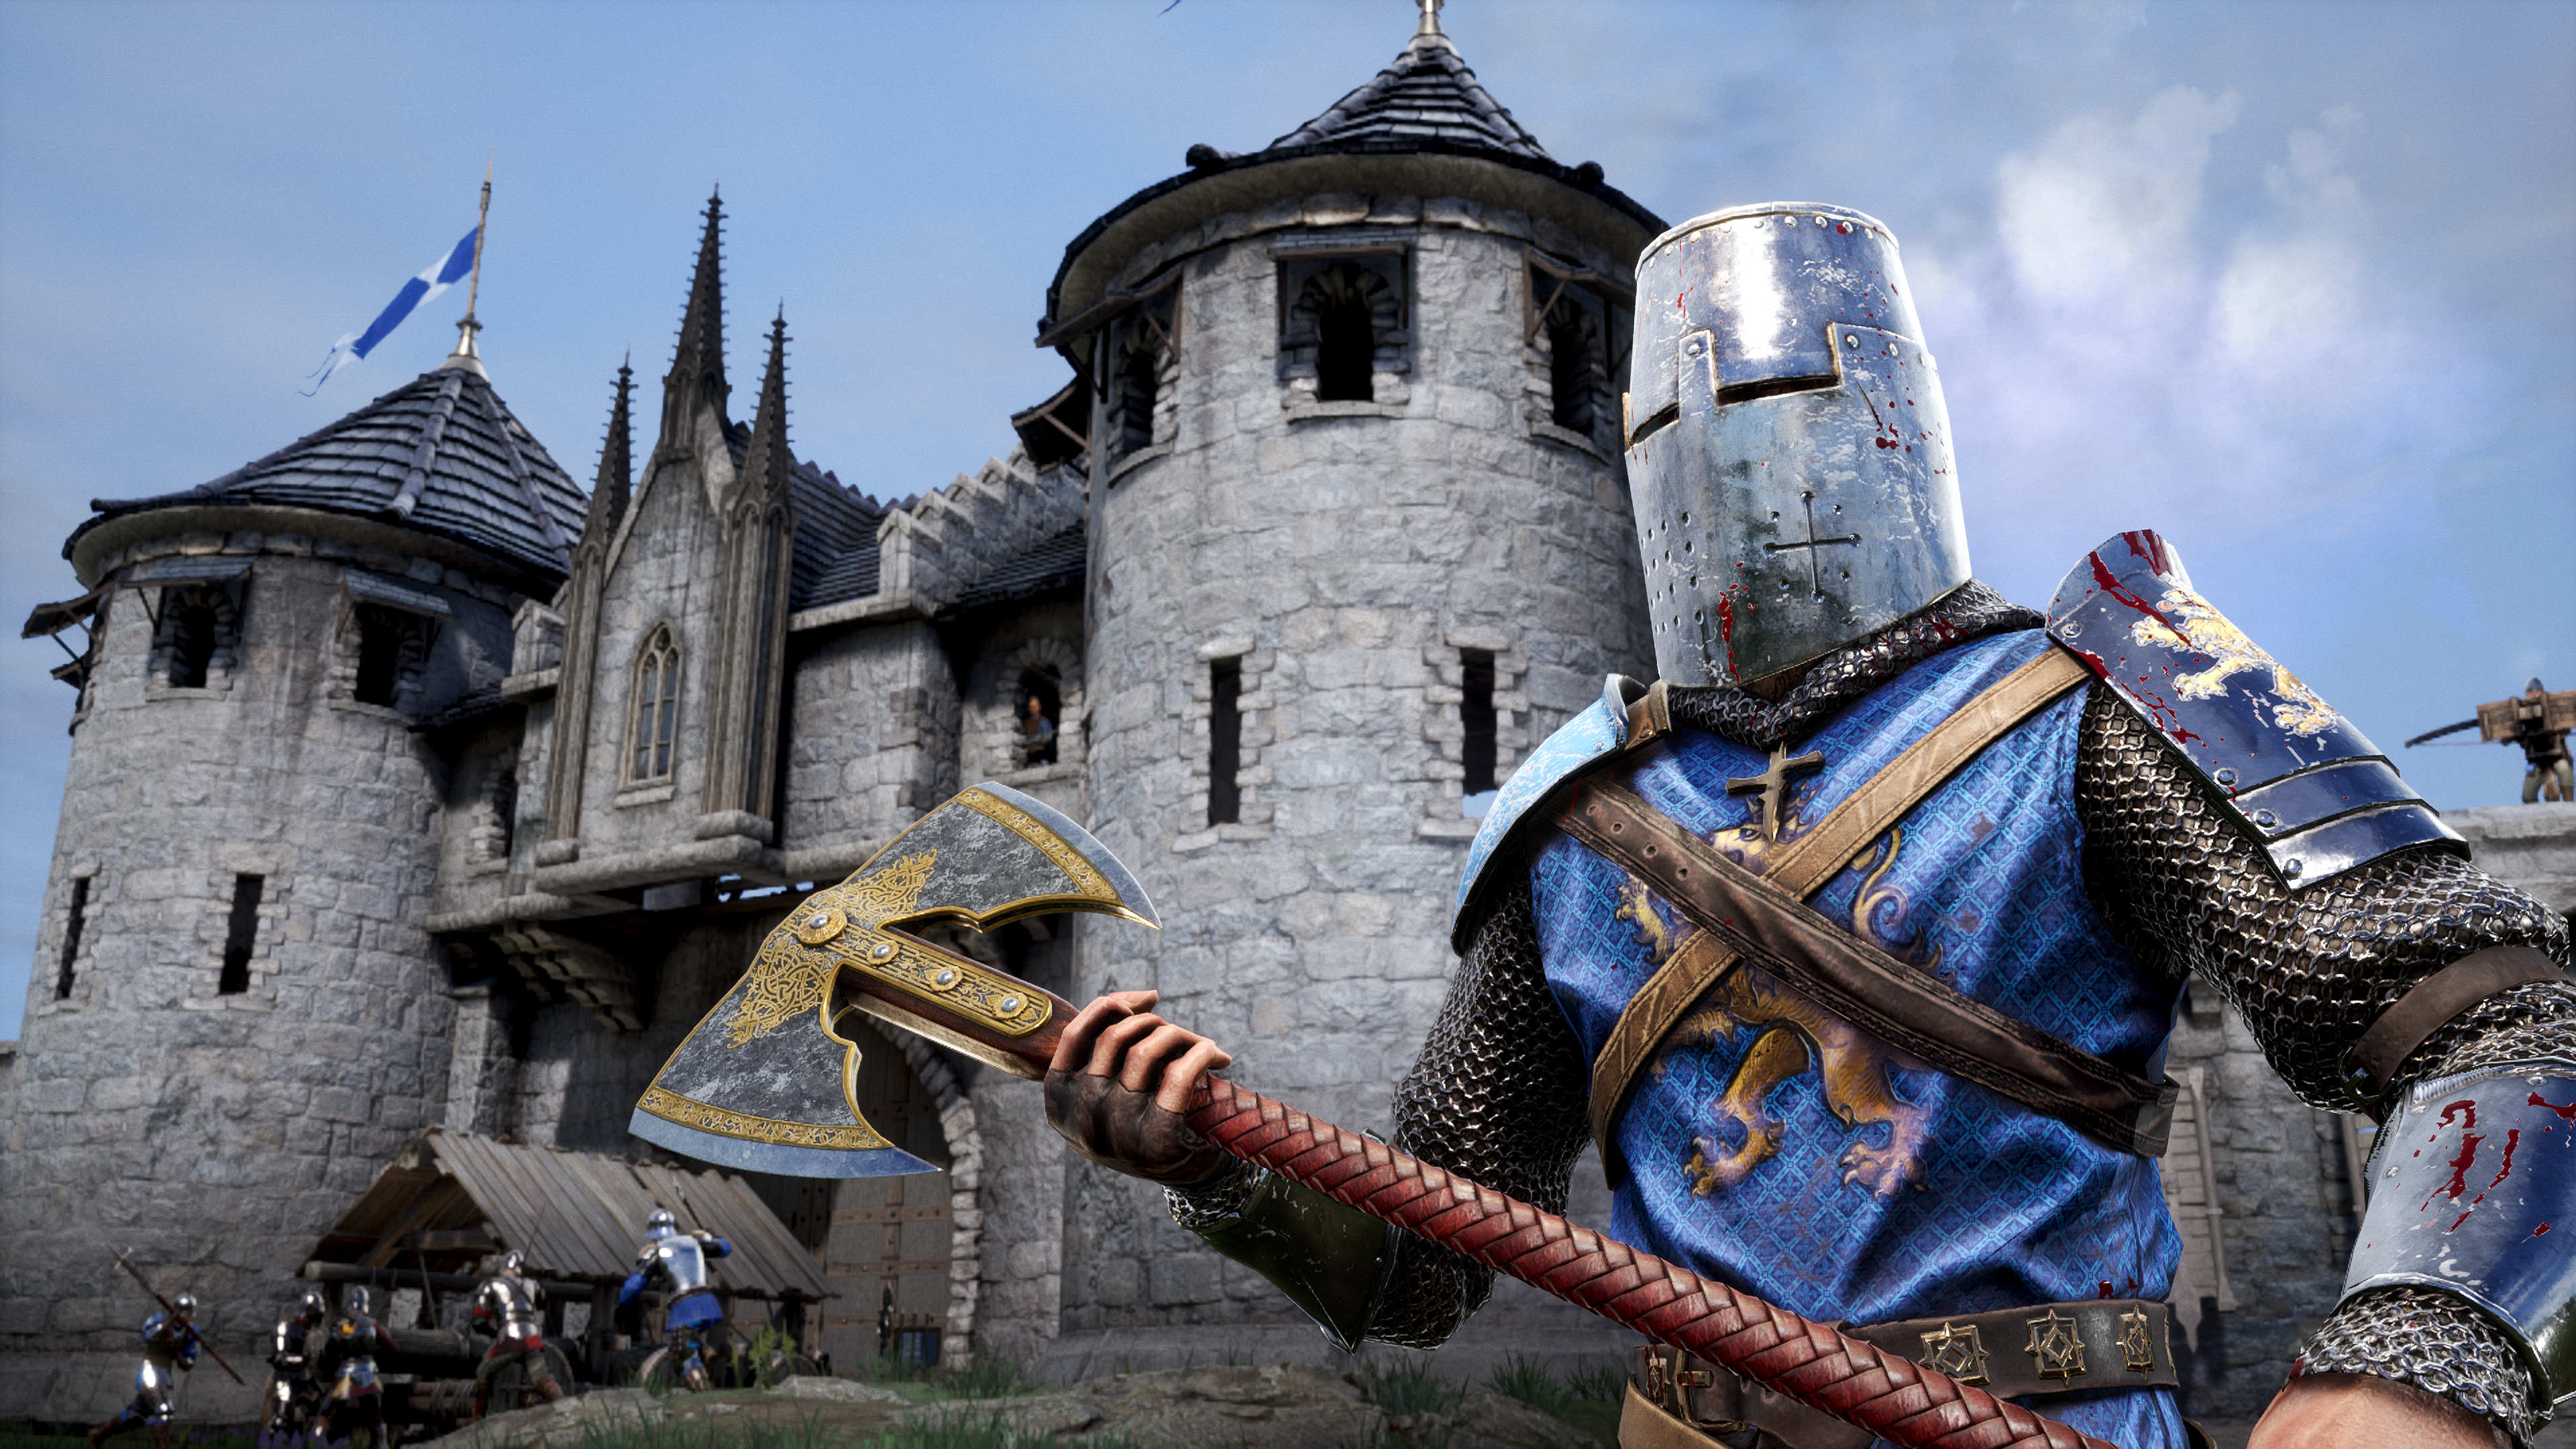 chivalry 2 ps5 download free